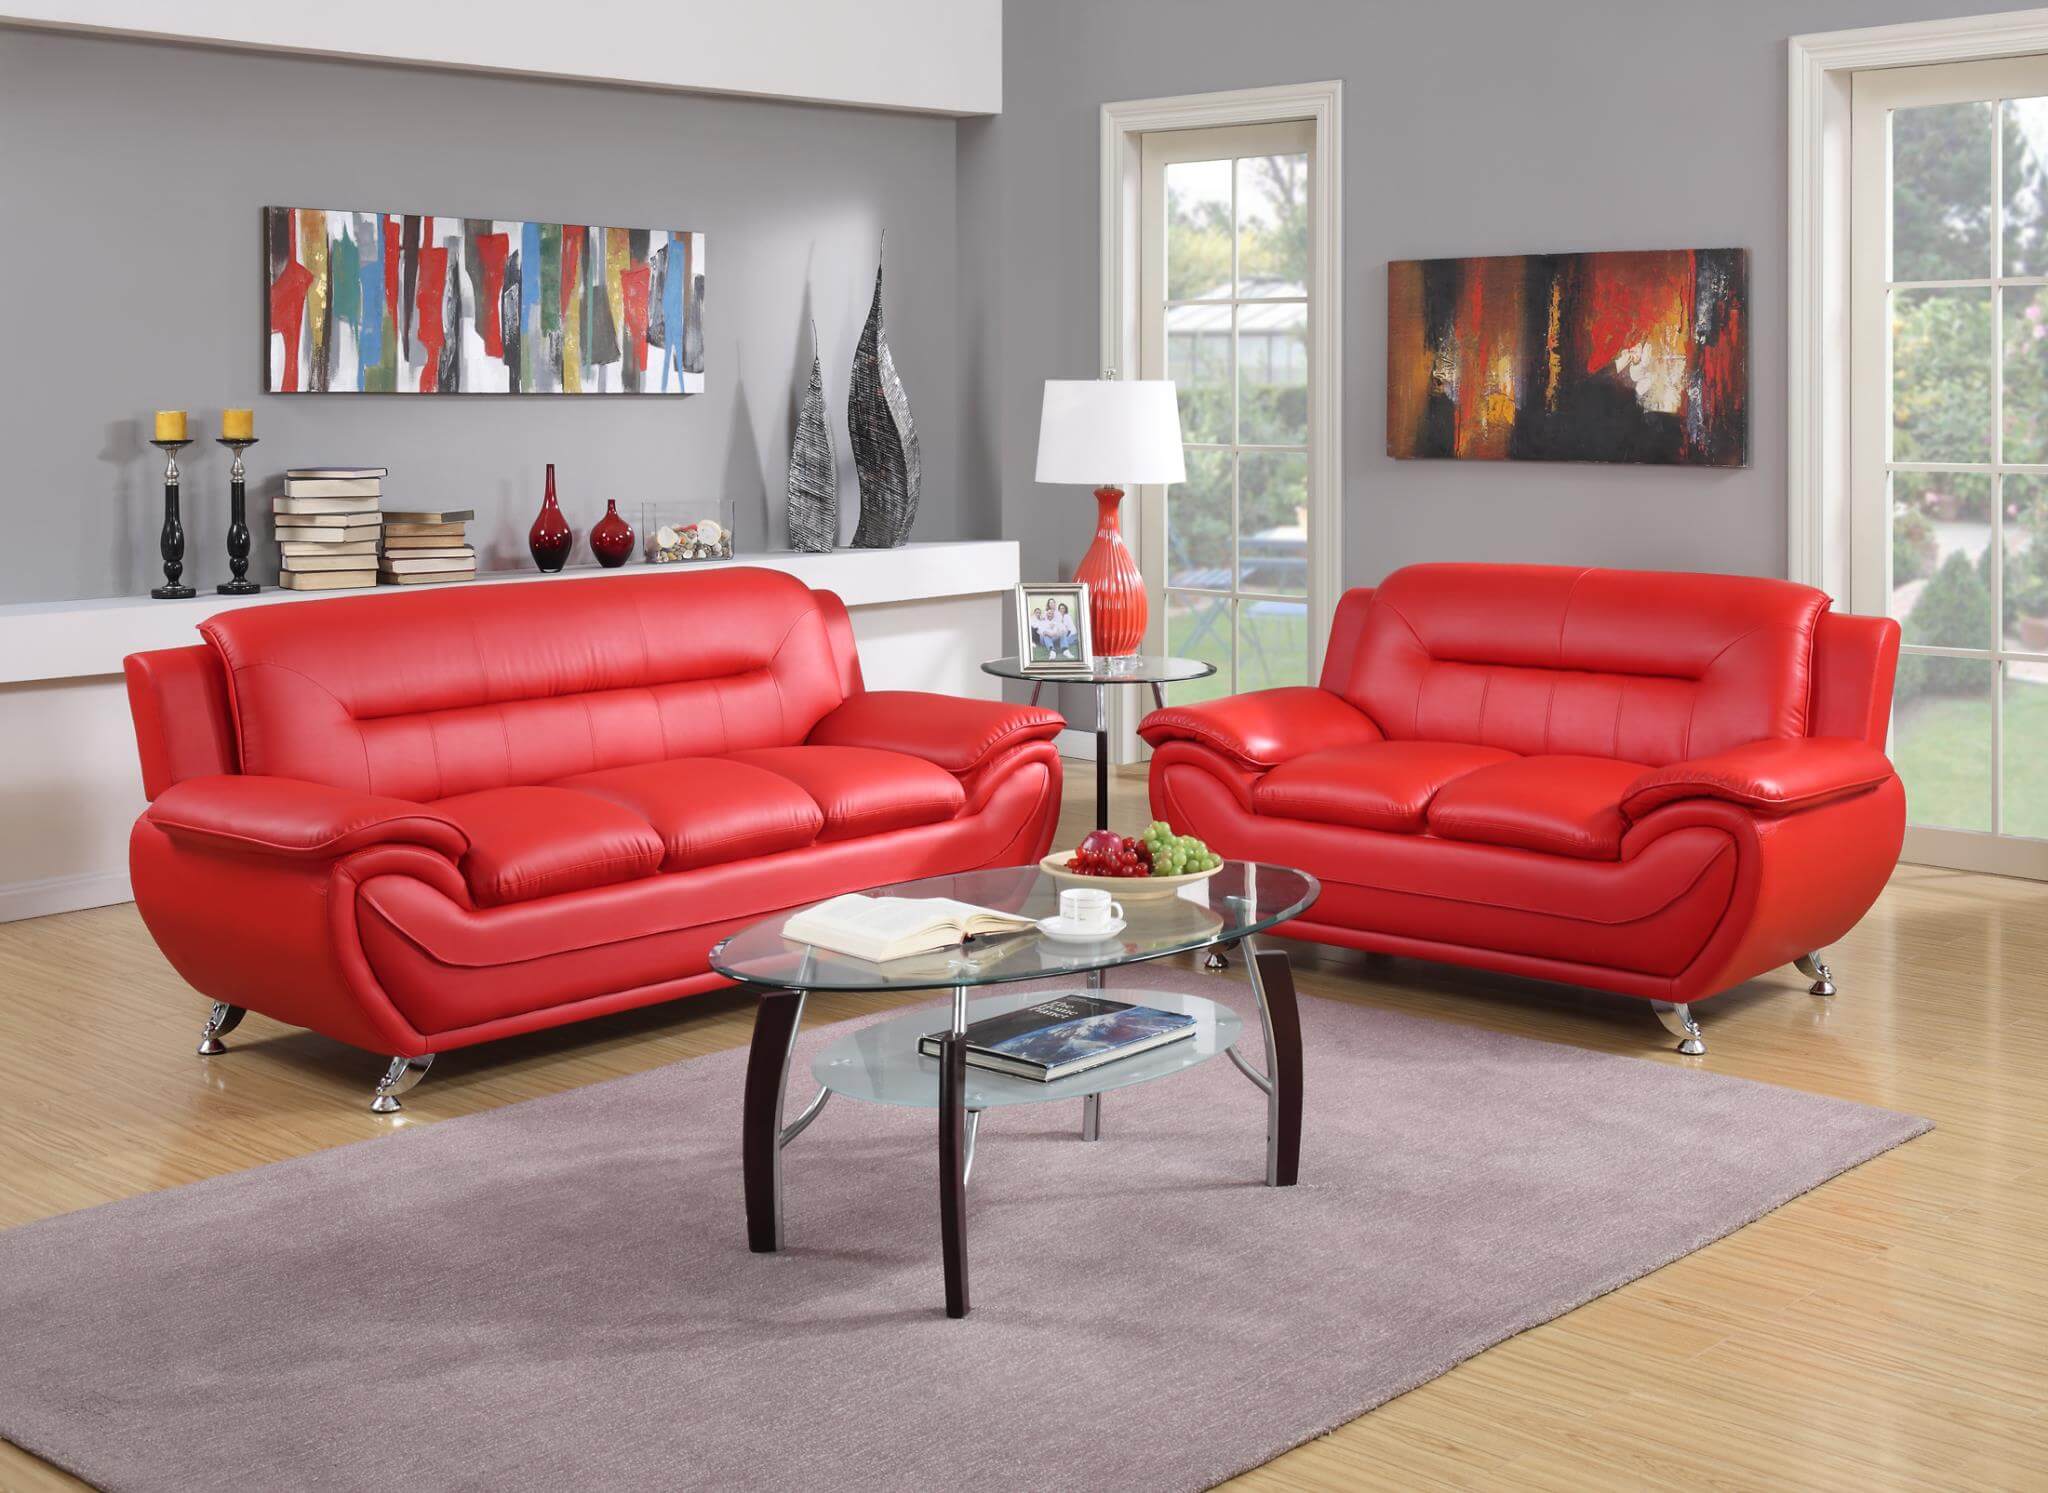 Red Contemporary Living Room Set, Real Leather Living Room Furniture Sets